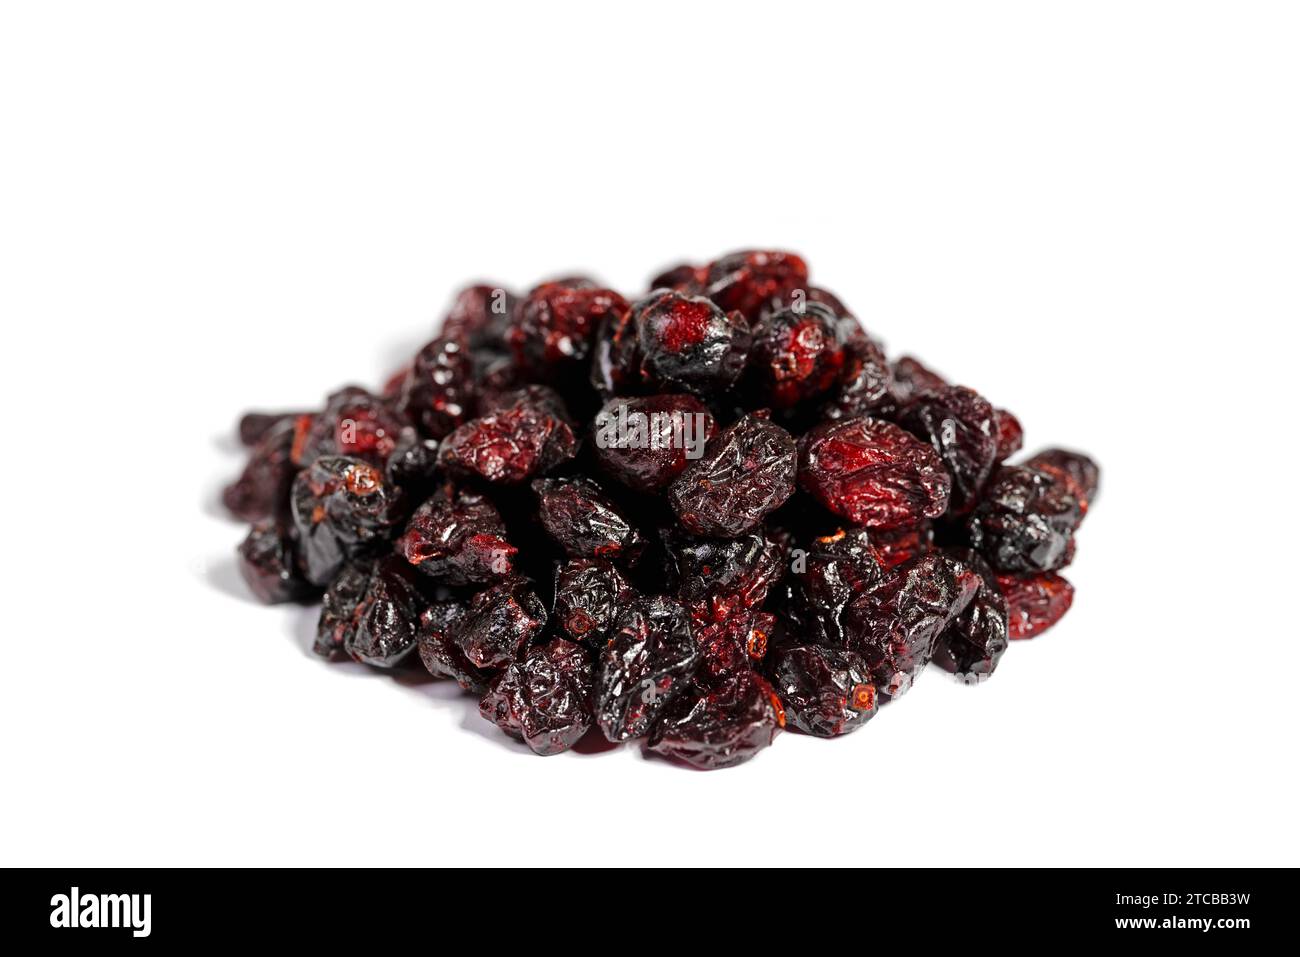 Dried cranberries against a white background Stock Photo